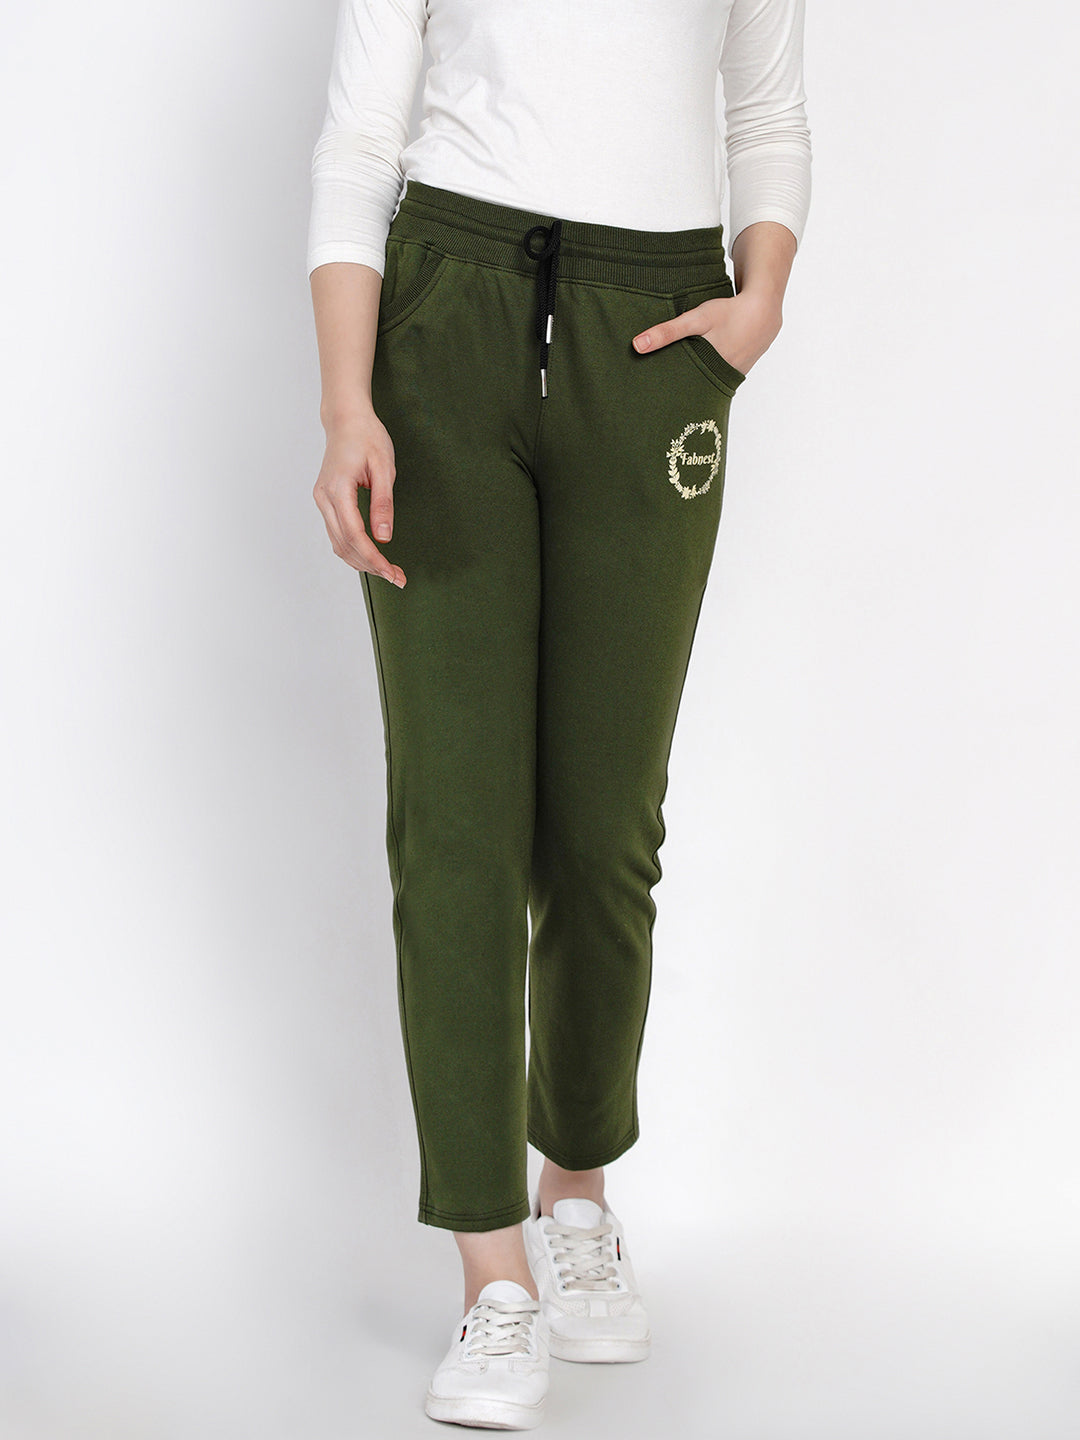 Winter Solid Olive Green Printed Fleece Track Pants-Track Pants-Fabnest